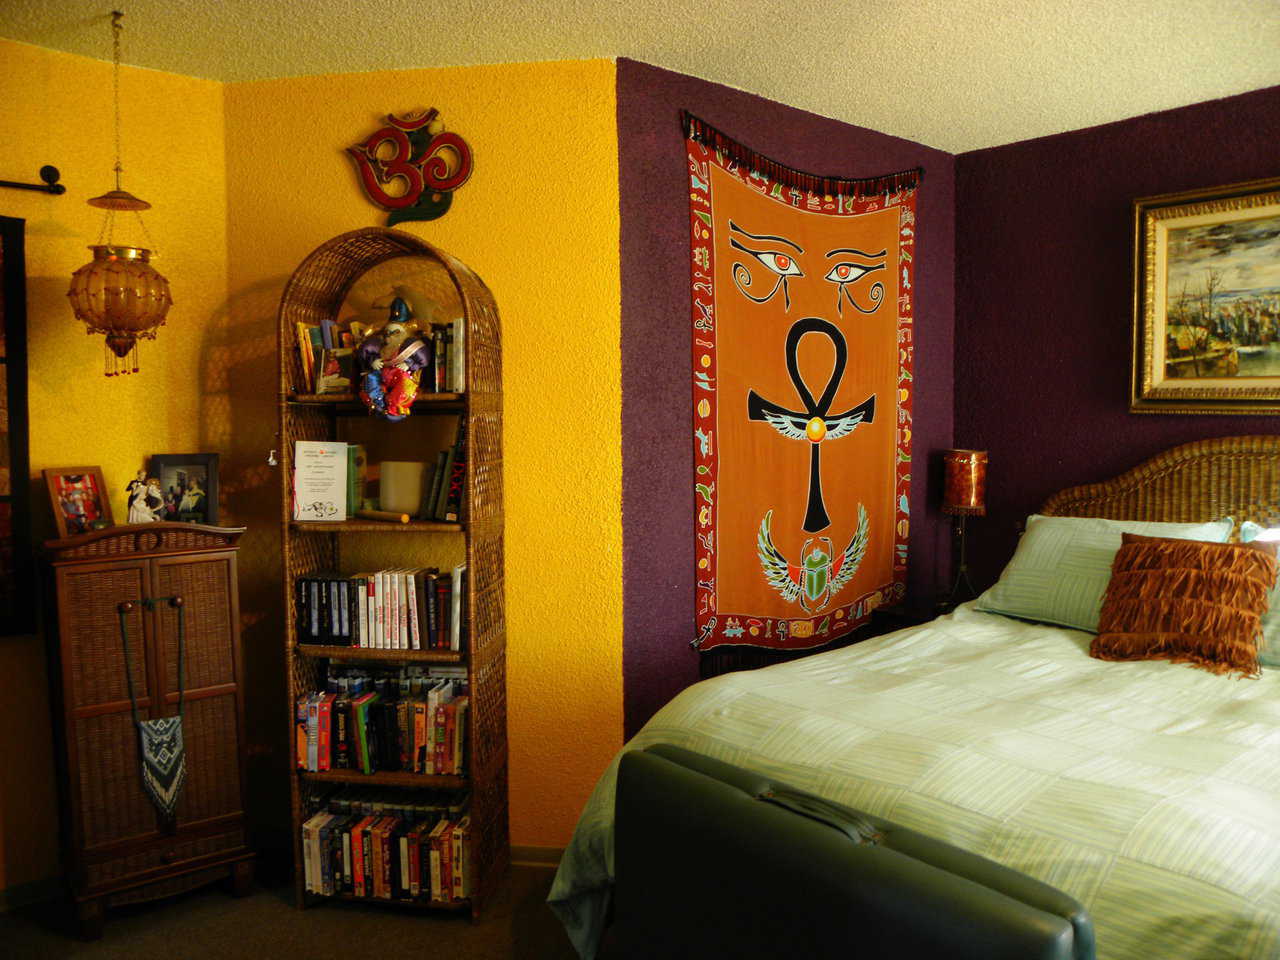 Each of the bedrooms has its own theme and feel.